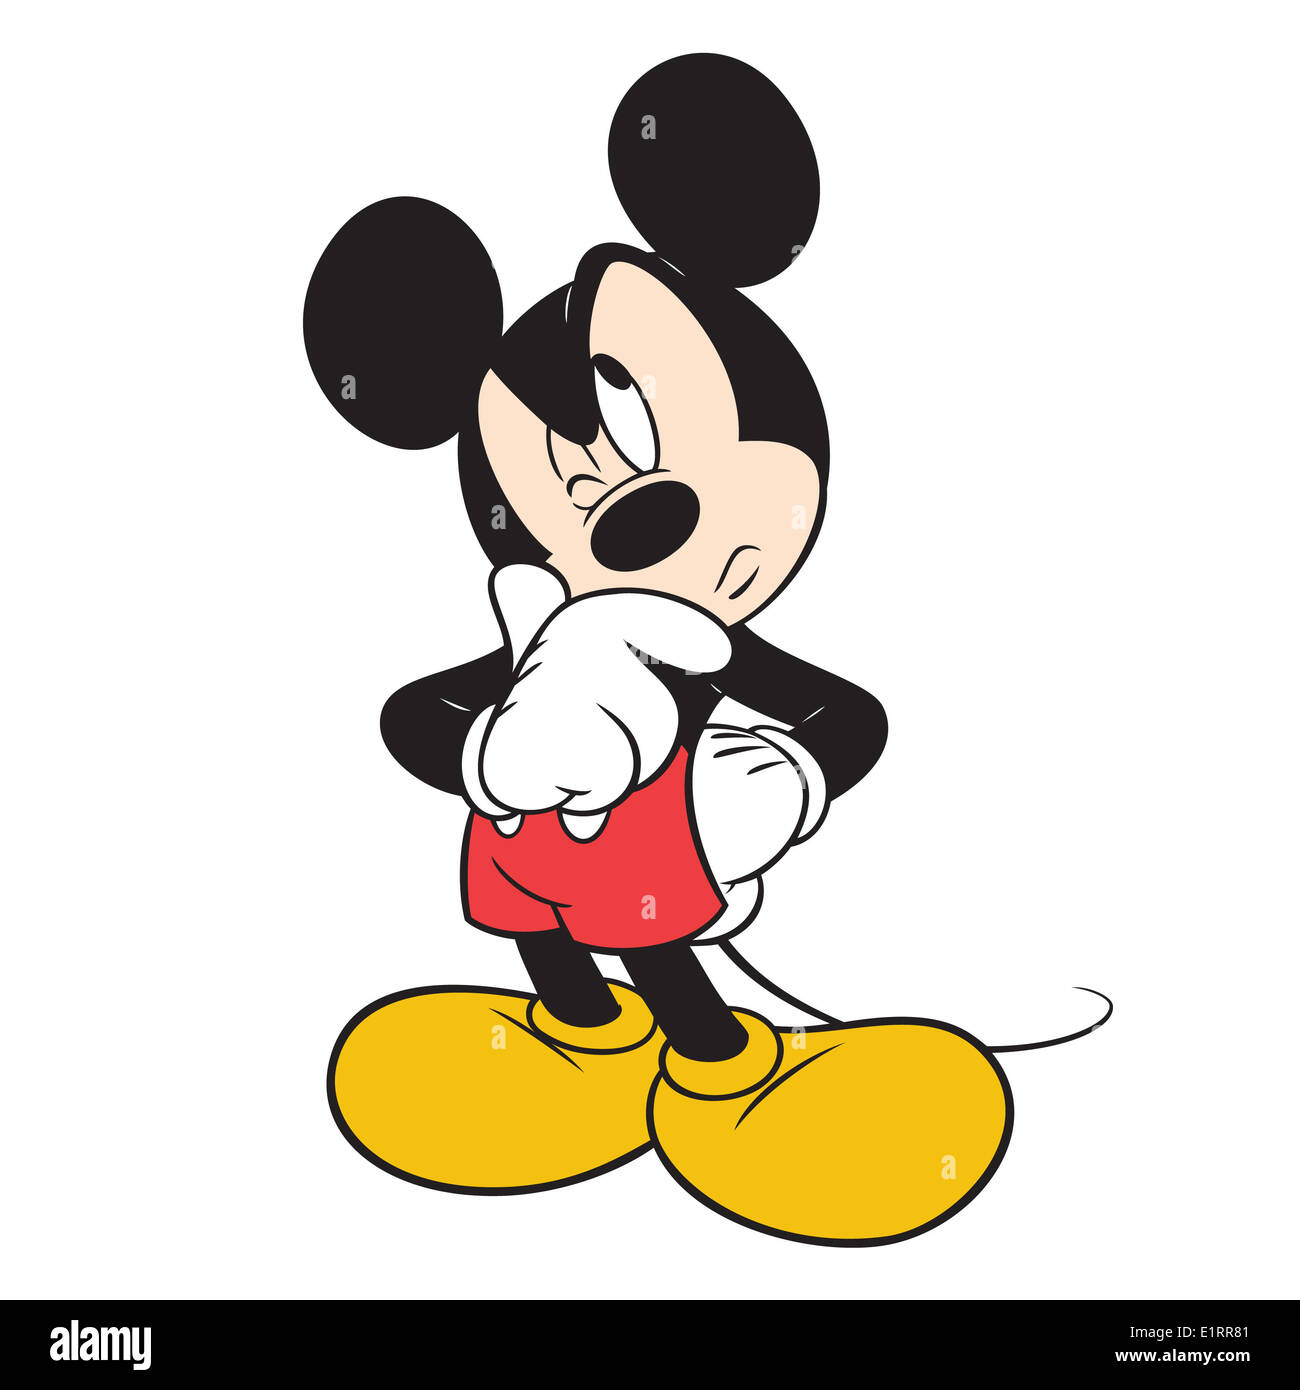 Mickey mouse cartoon Cut Out Stock Images & Pictures - Alamy